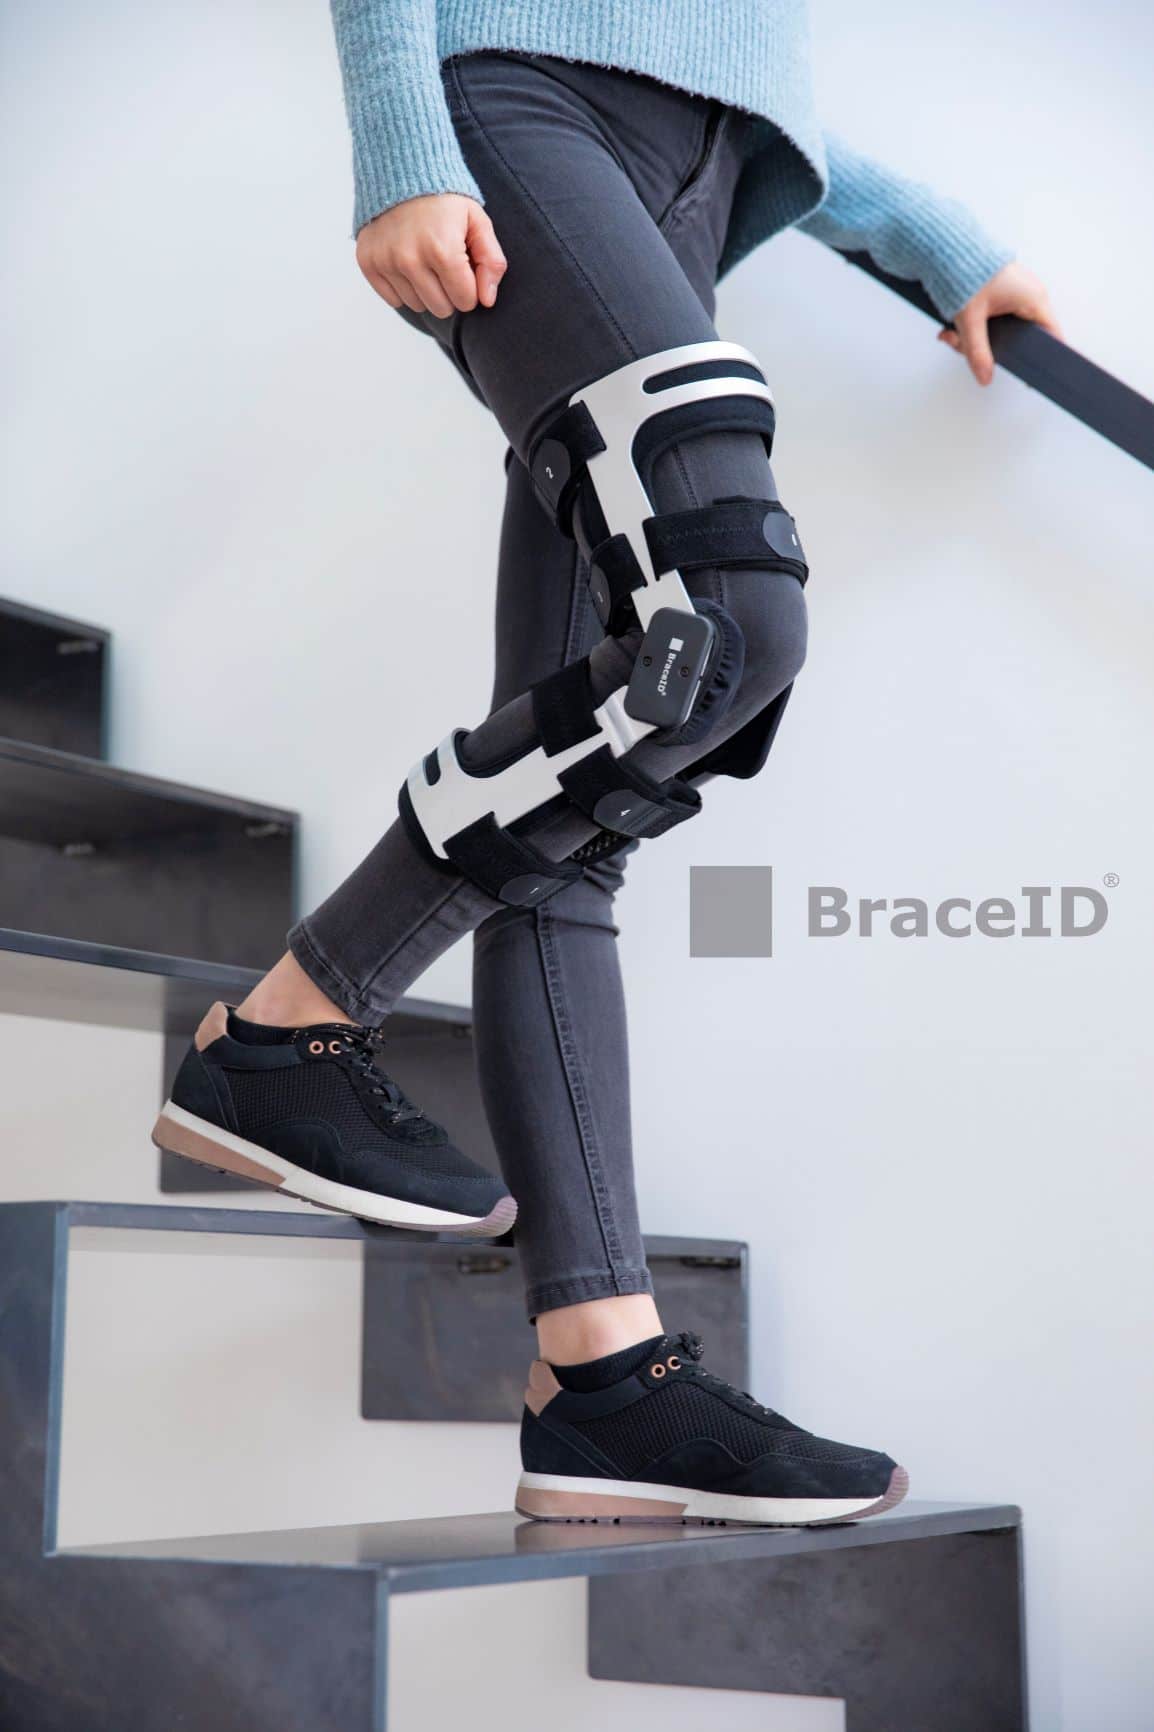 The Right Orthotic Knee Braces for Protection and Function